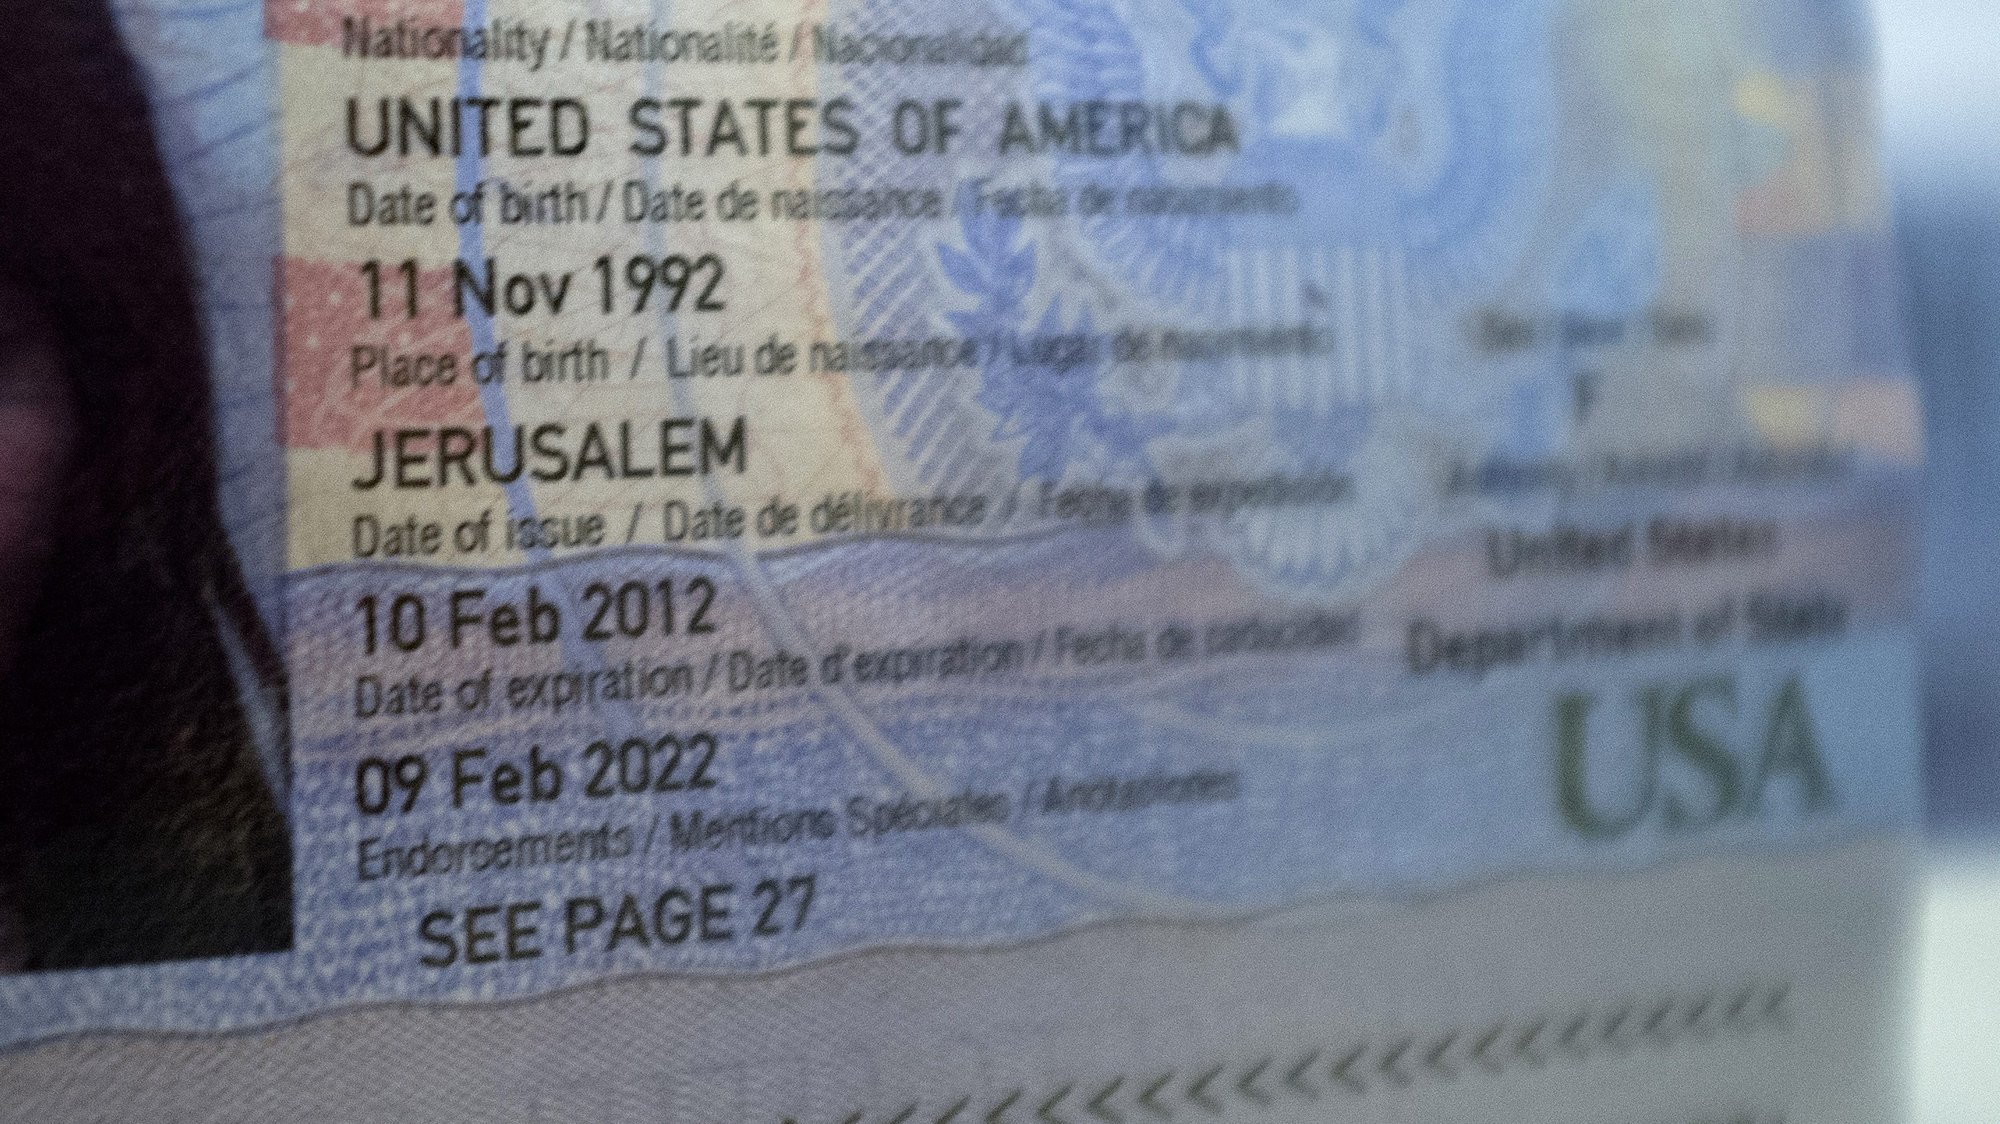 epa04789943 An unidentified Israeli American&#039;s passport shows that she was born in Jerusalem with no country named, in a photographic copy of the passport made in Jerusalem, 08 June 2015. The United States Supreme Court has struck down a disputed law that would have allowed American who are born in Jerusalem to also list Israel as the country of birth. The court ruled 6-3 to not alter the State Department&#039;s long-standing policy of not listing Jerusalem as the birthplace of Americans born in Jerusalem. Those born in Tel Aviv are listed as being born in Israel. At issue is the the US&#039;s policy, and many other countries, since the 1967 Six Day War to refuse to recognize any nation&#039;s sovereignty over Jerusalem until both Israel and the Palestinians resolve their conflict via negotiation.  EPA/JIM HOLLANDER